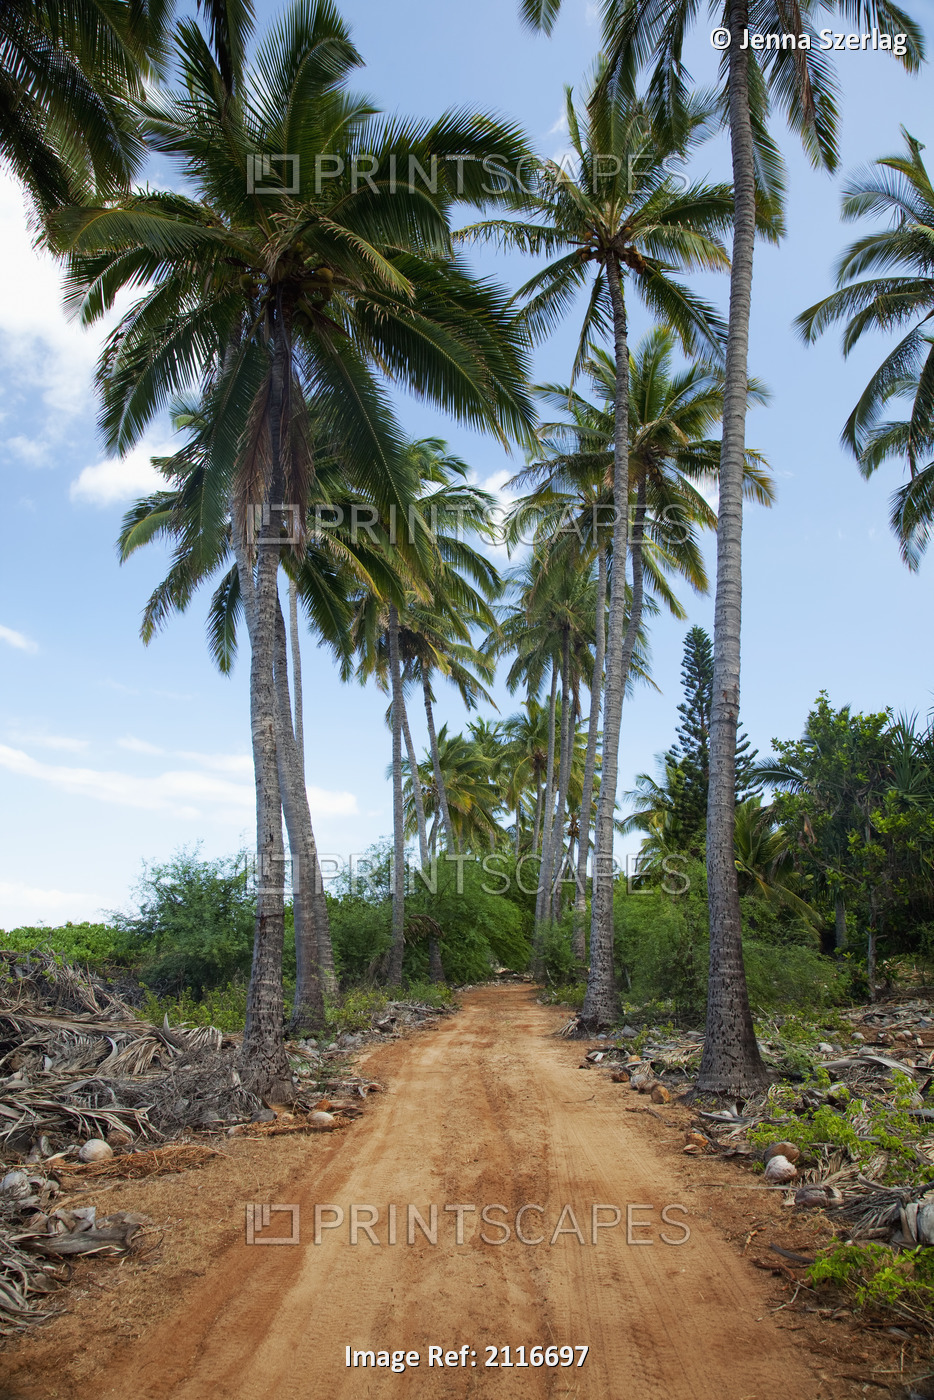 Hawaii, Lanai, A dirt road lined with tall palm trees.